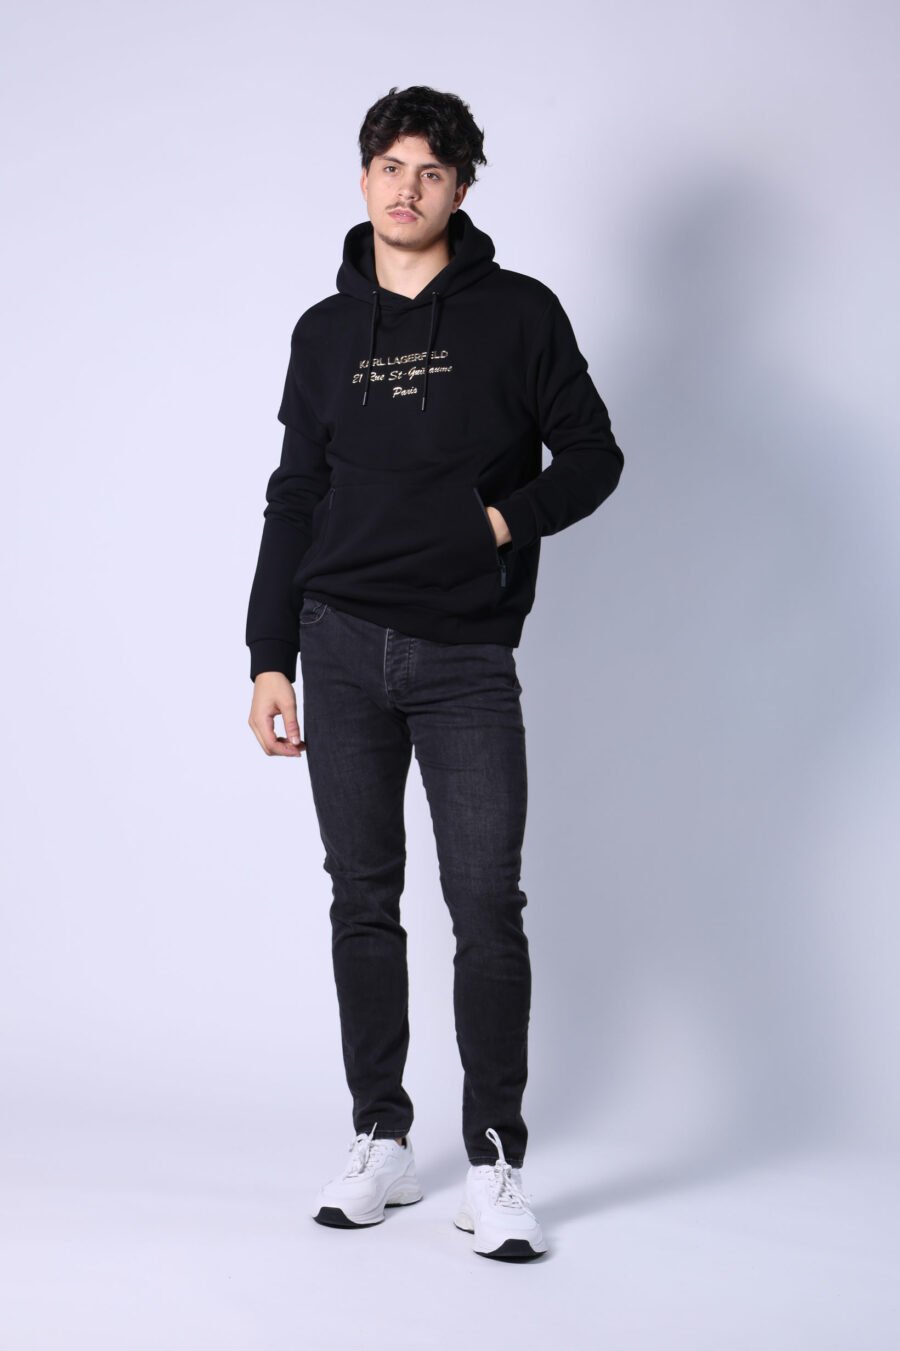 Black hooded sweatshirt with gold lettering "rue st guillaume" logo - Untitled Catalog 05727